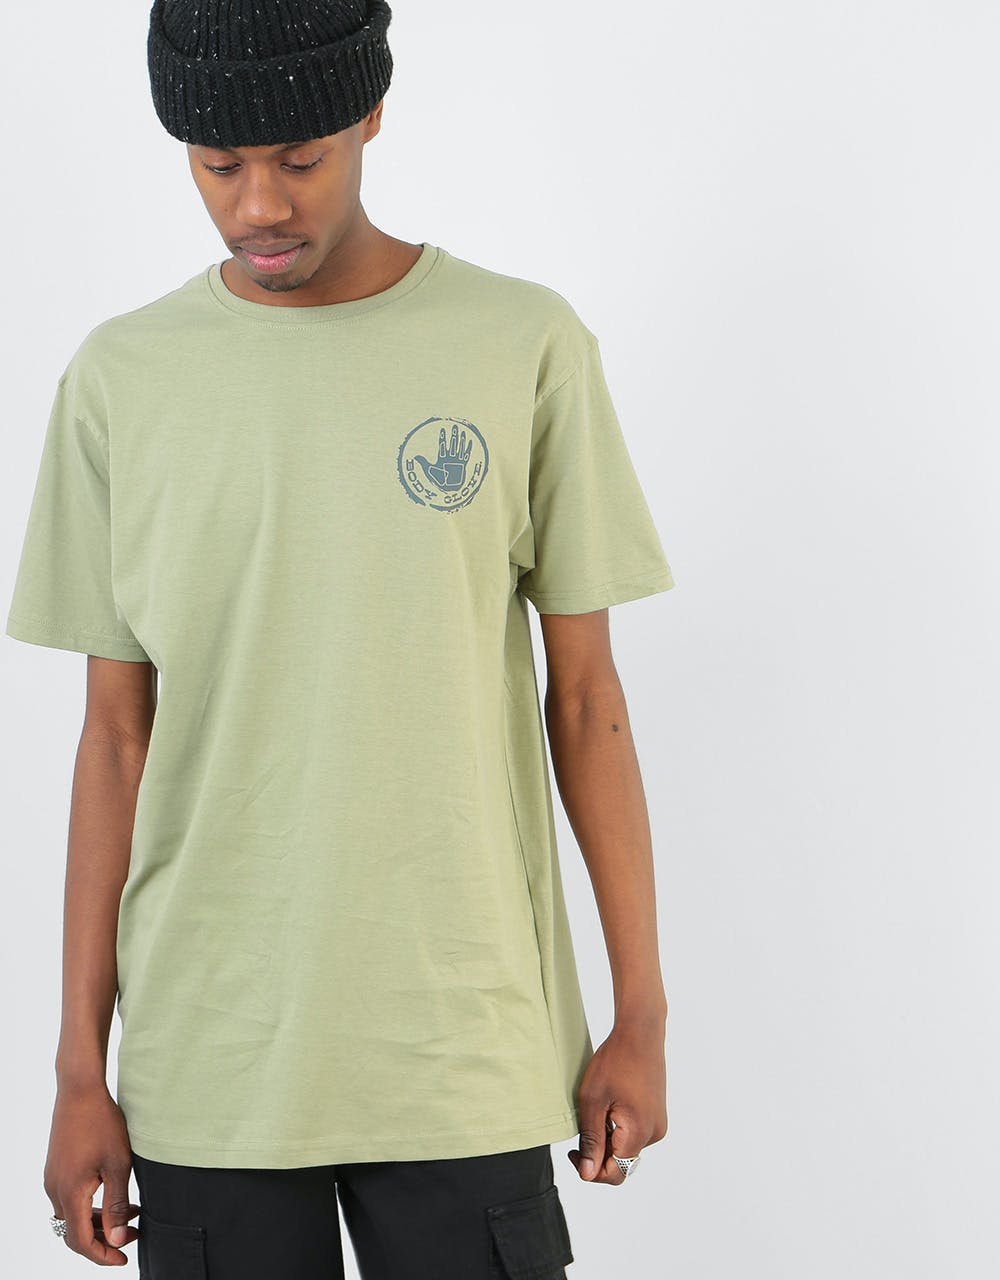 Body Glove Stamped T-Shirt - Olive